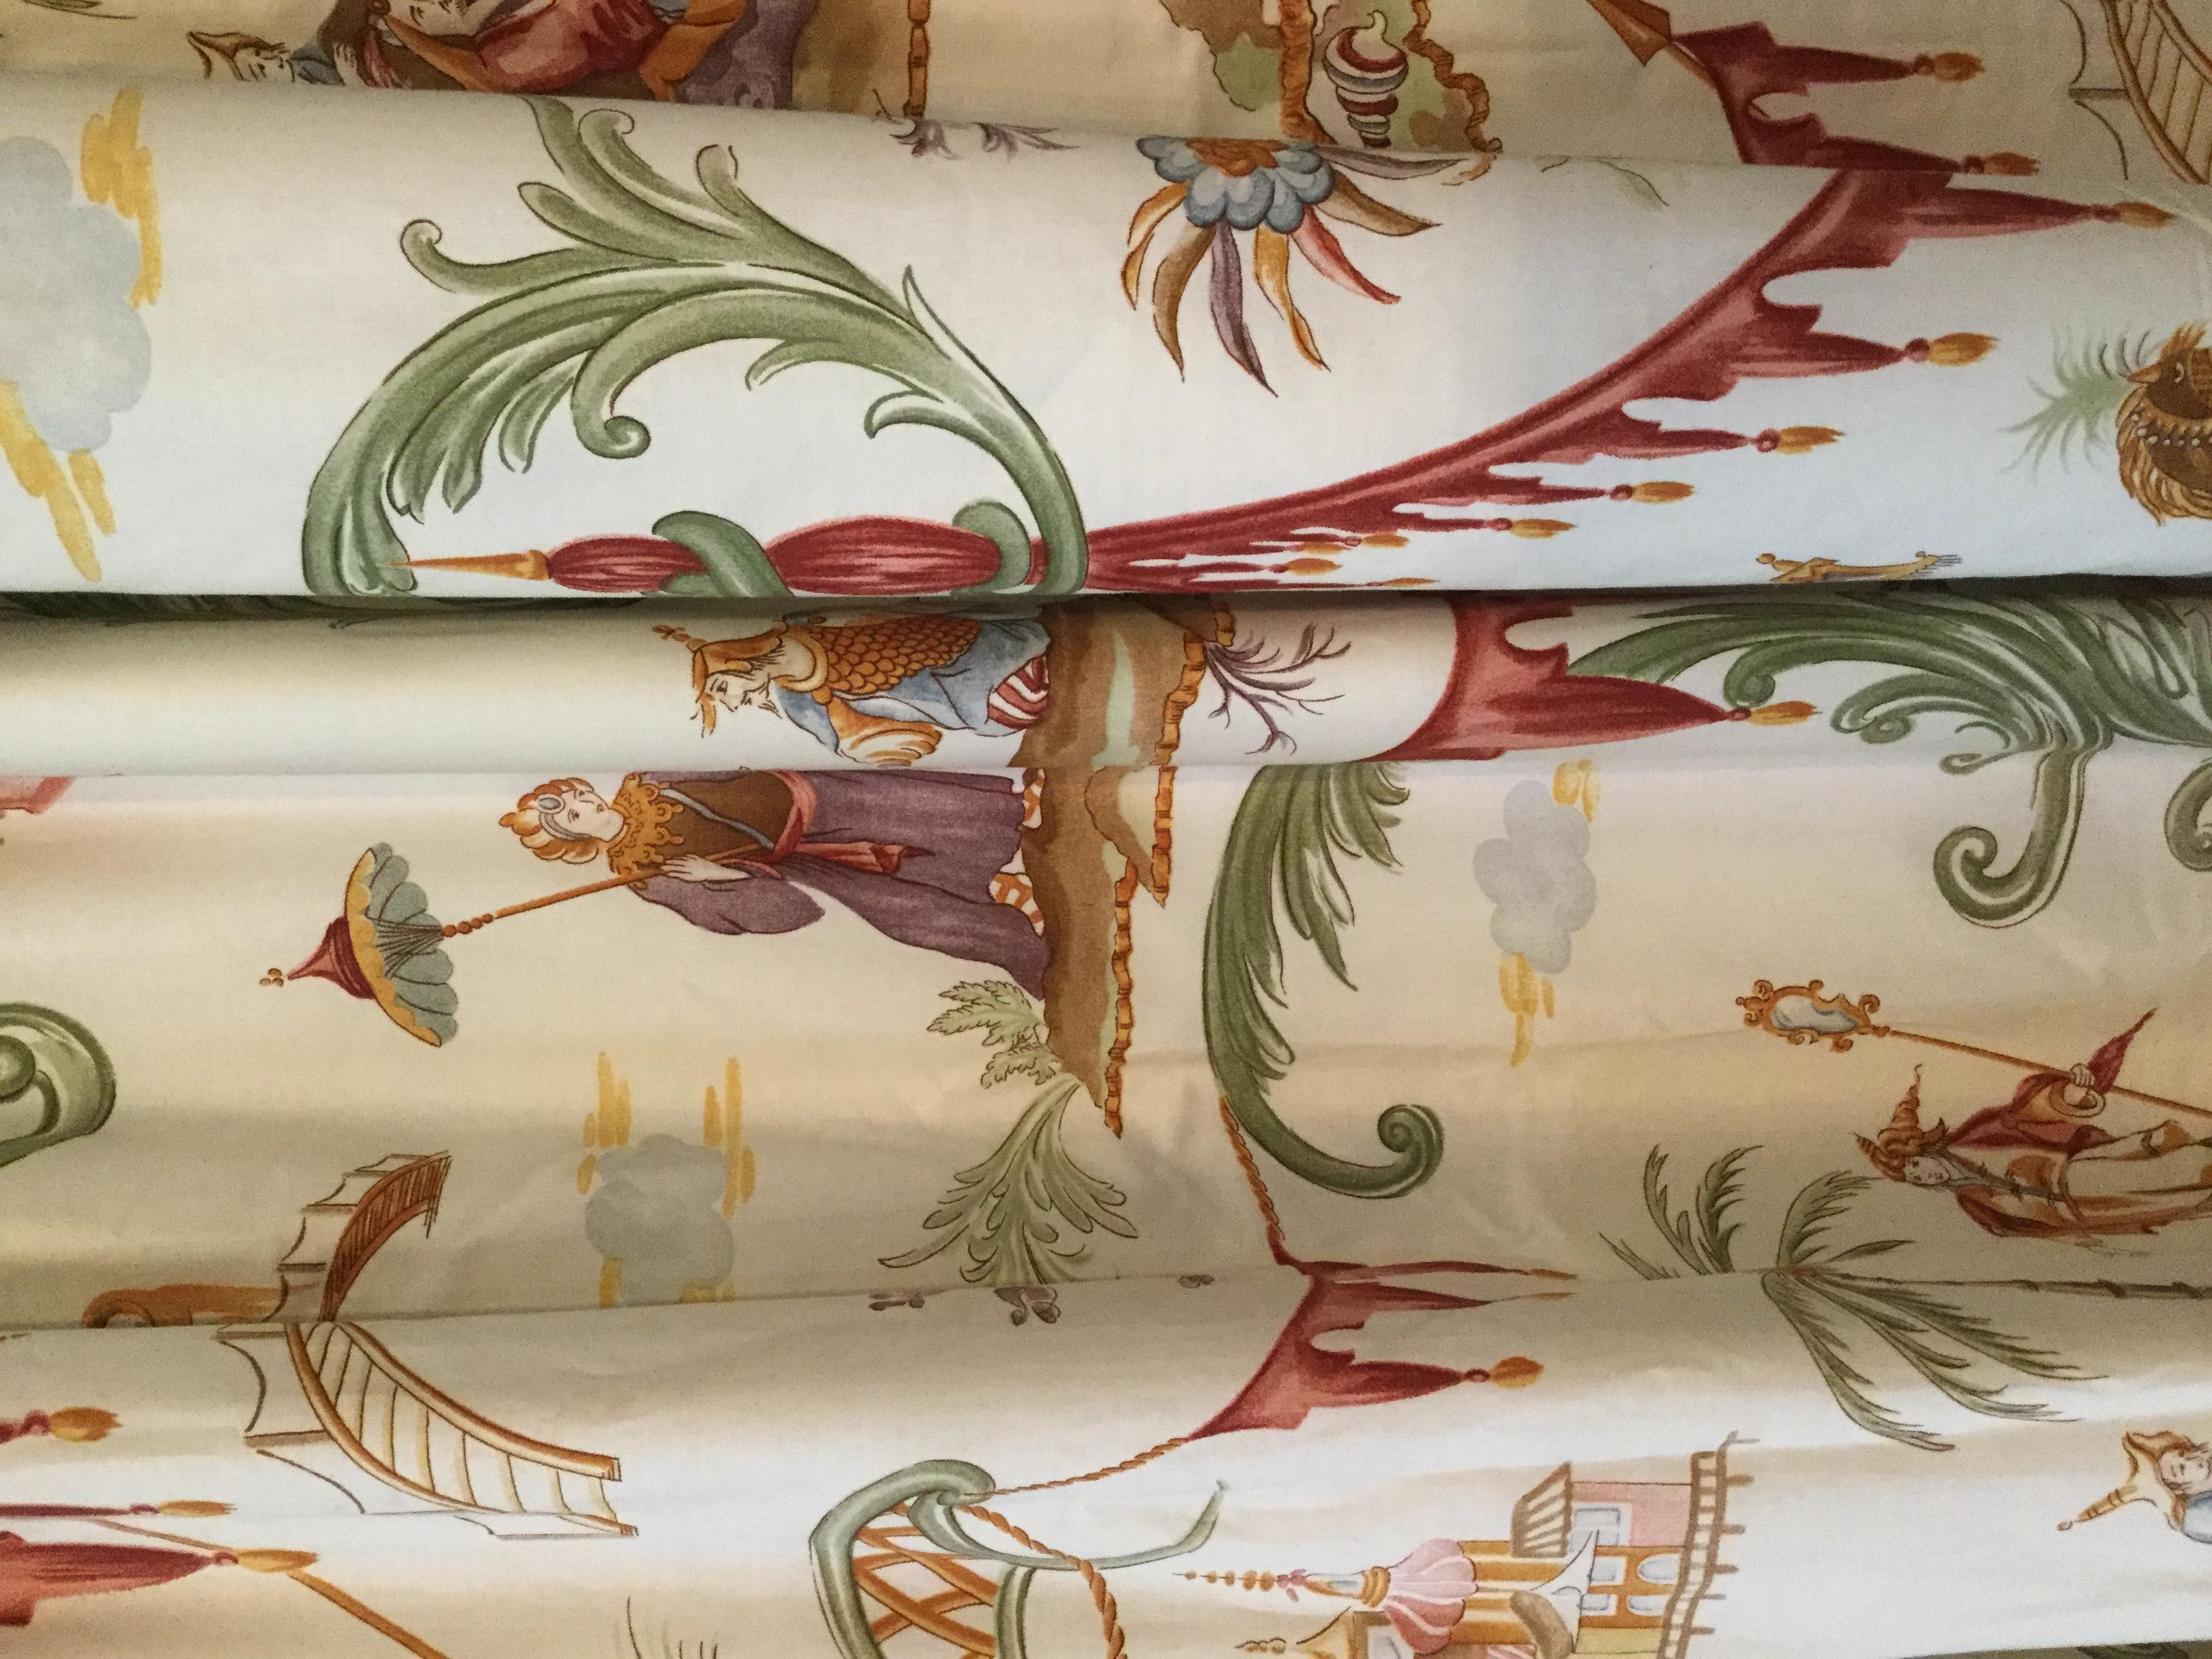 Fabulous pair of Scalamandre toile Drapes. On an off-white background, this whimsical toile pattern depicts a Chinoiseir theme with people, camels, and lots of lush green foliage. There are an abundance of raspberry scrolls, green arabesque, and